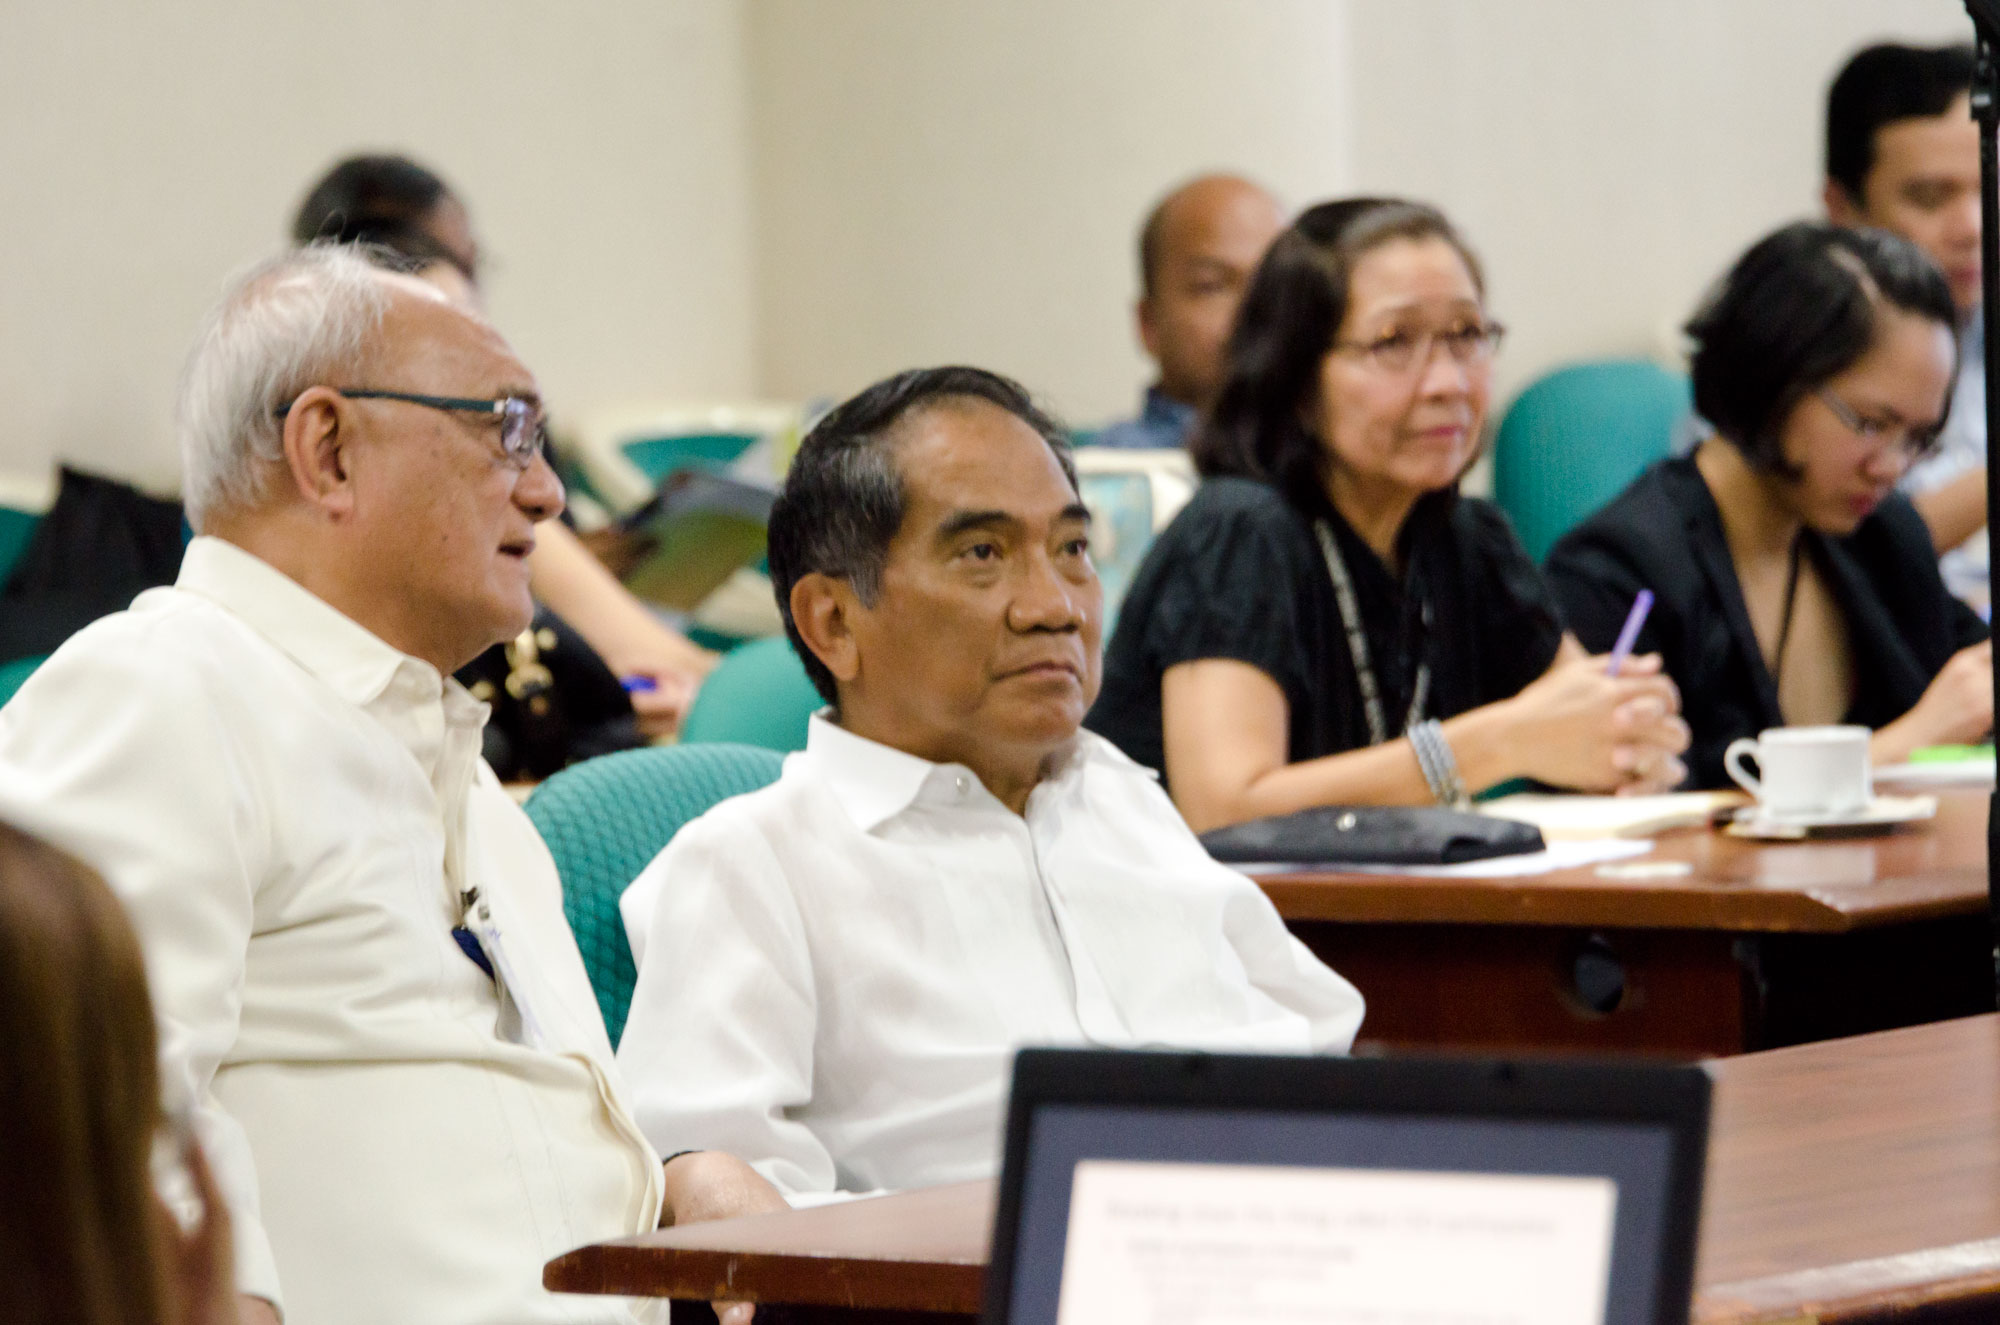 Senate Centennial Lecture Series “Assessment of the Bottom-up Budgeting Process for FY 2015-ggm_7970.jpg